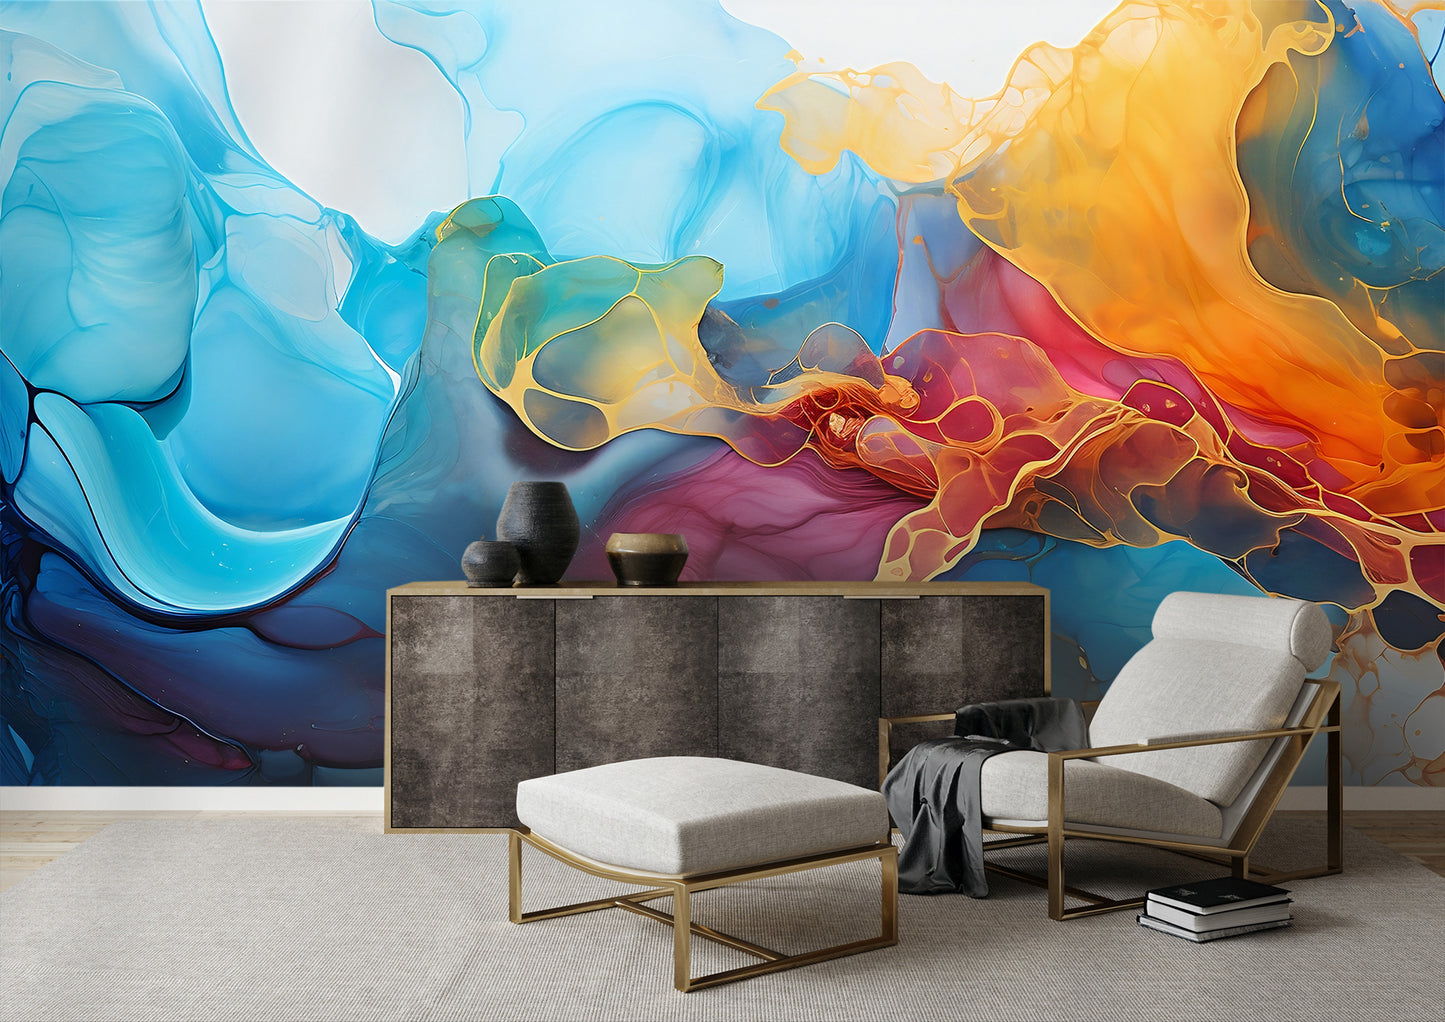 Removable Mural with Self Adhesive Feature for Convenient Application